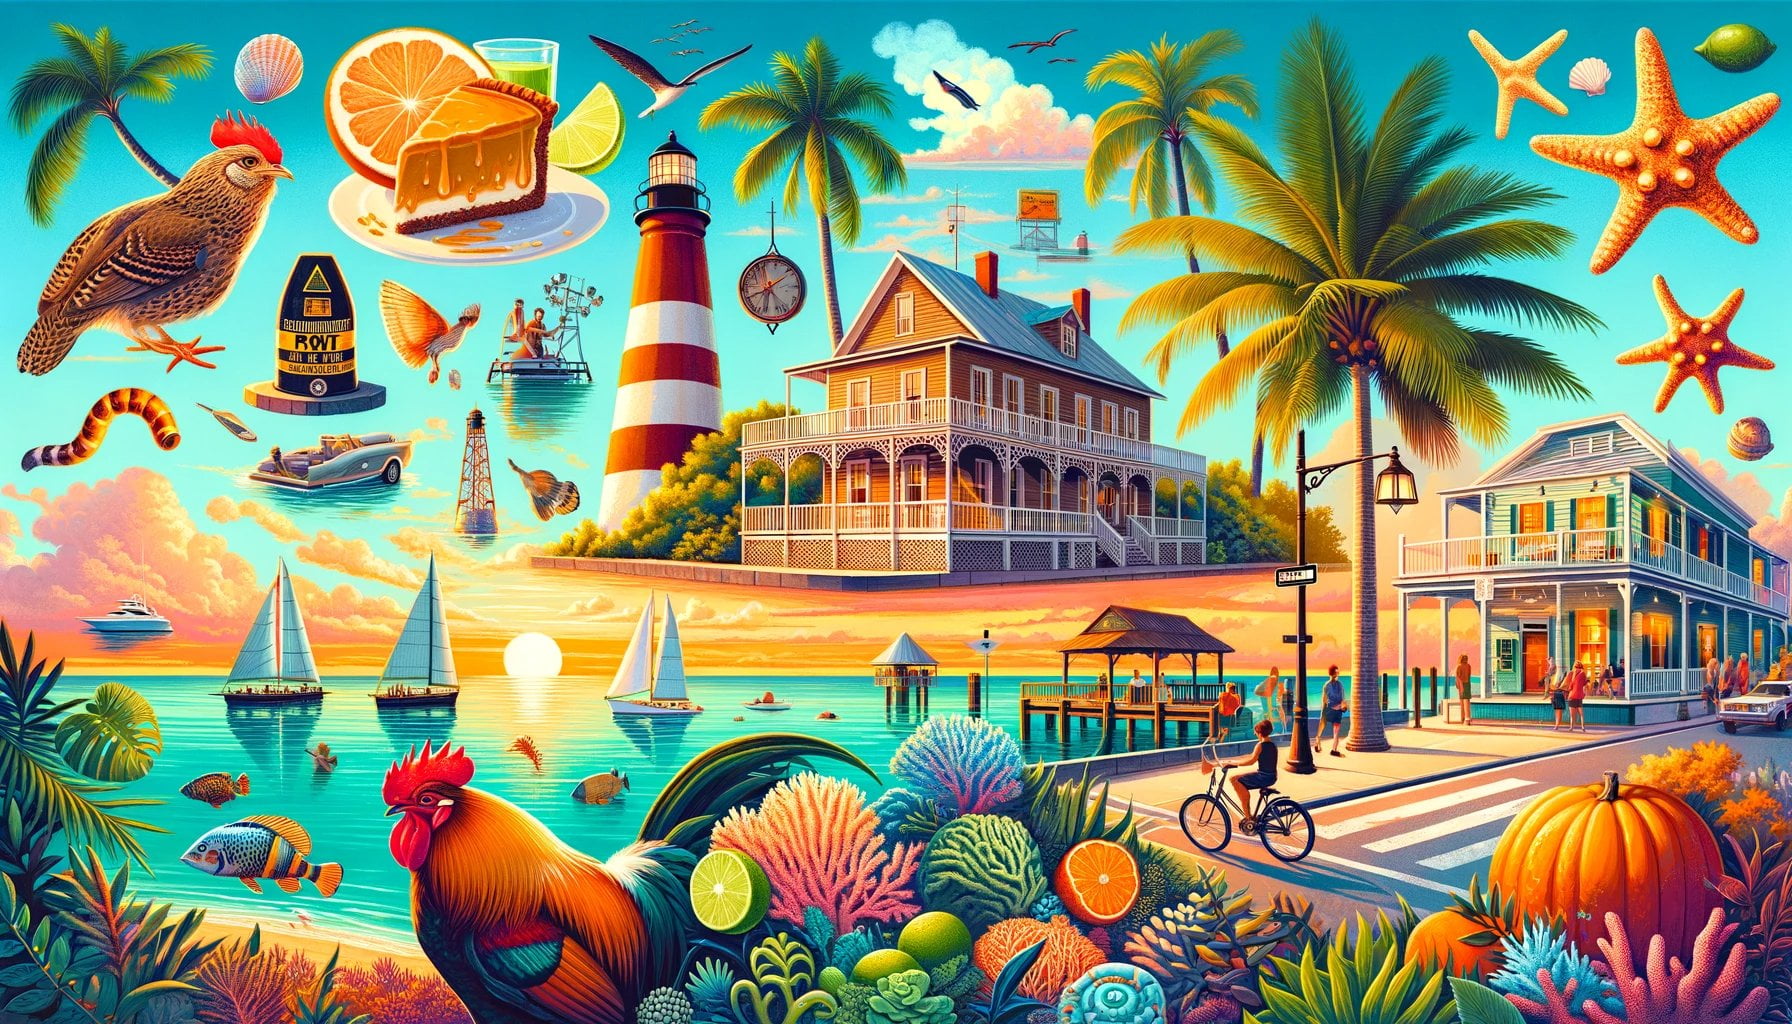 10 facts about key west 1